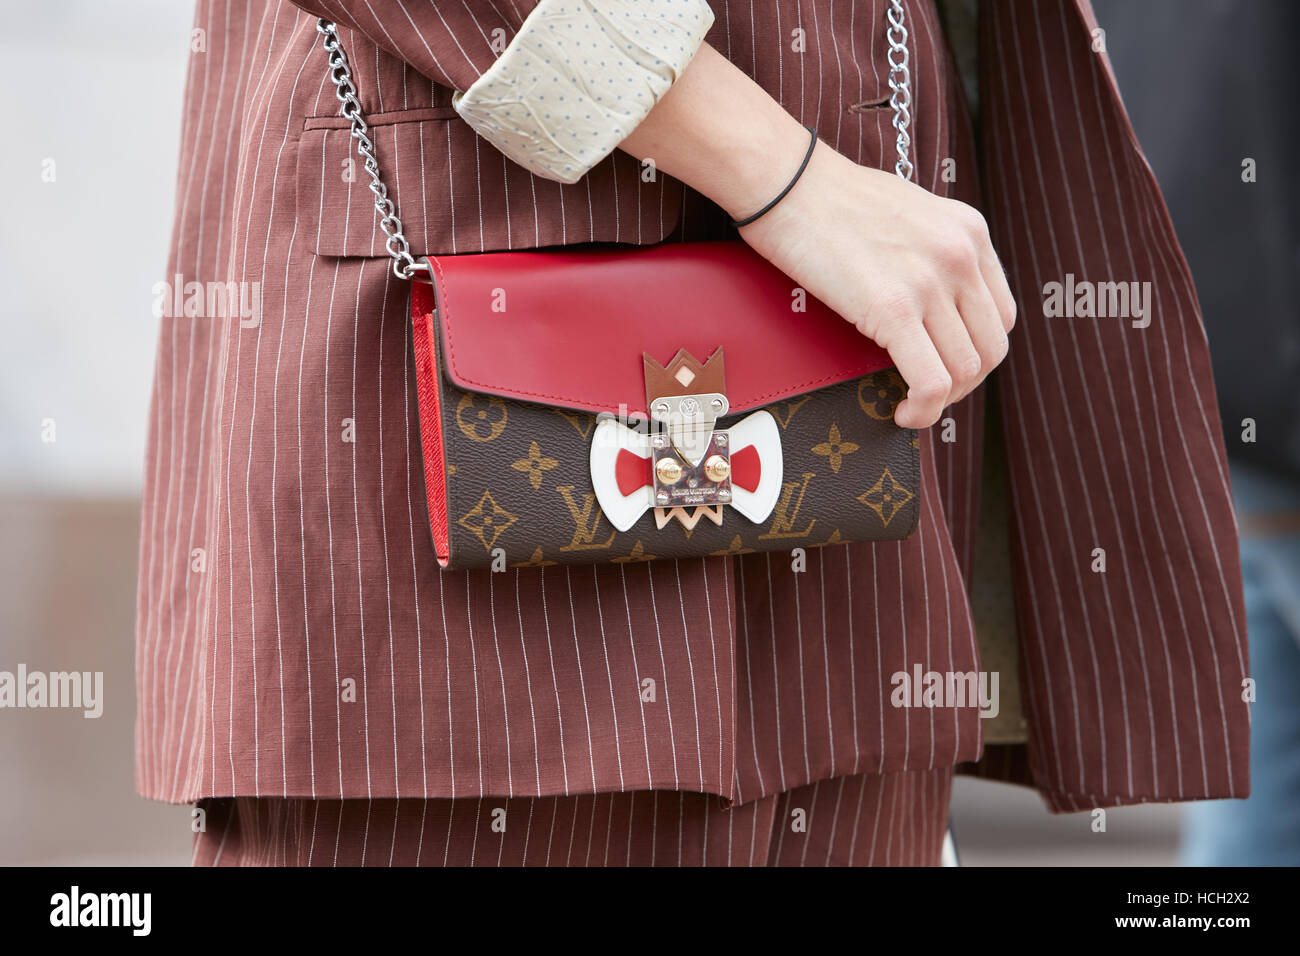 Fashion Look Featuring Louis Vuitton Bags and Louis Vuitton Bags by  jordanrisa - ShopStyle